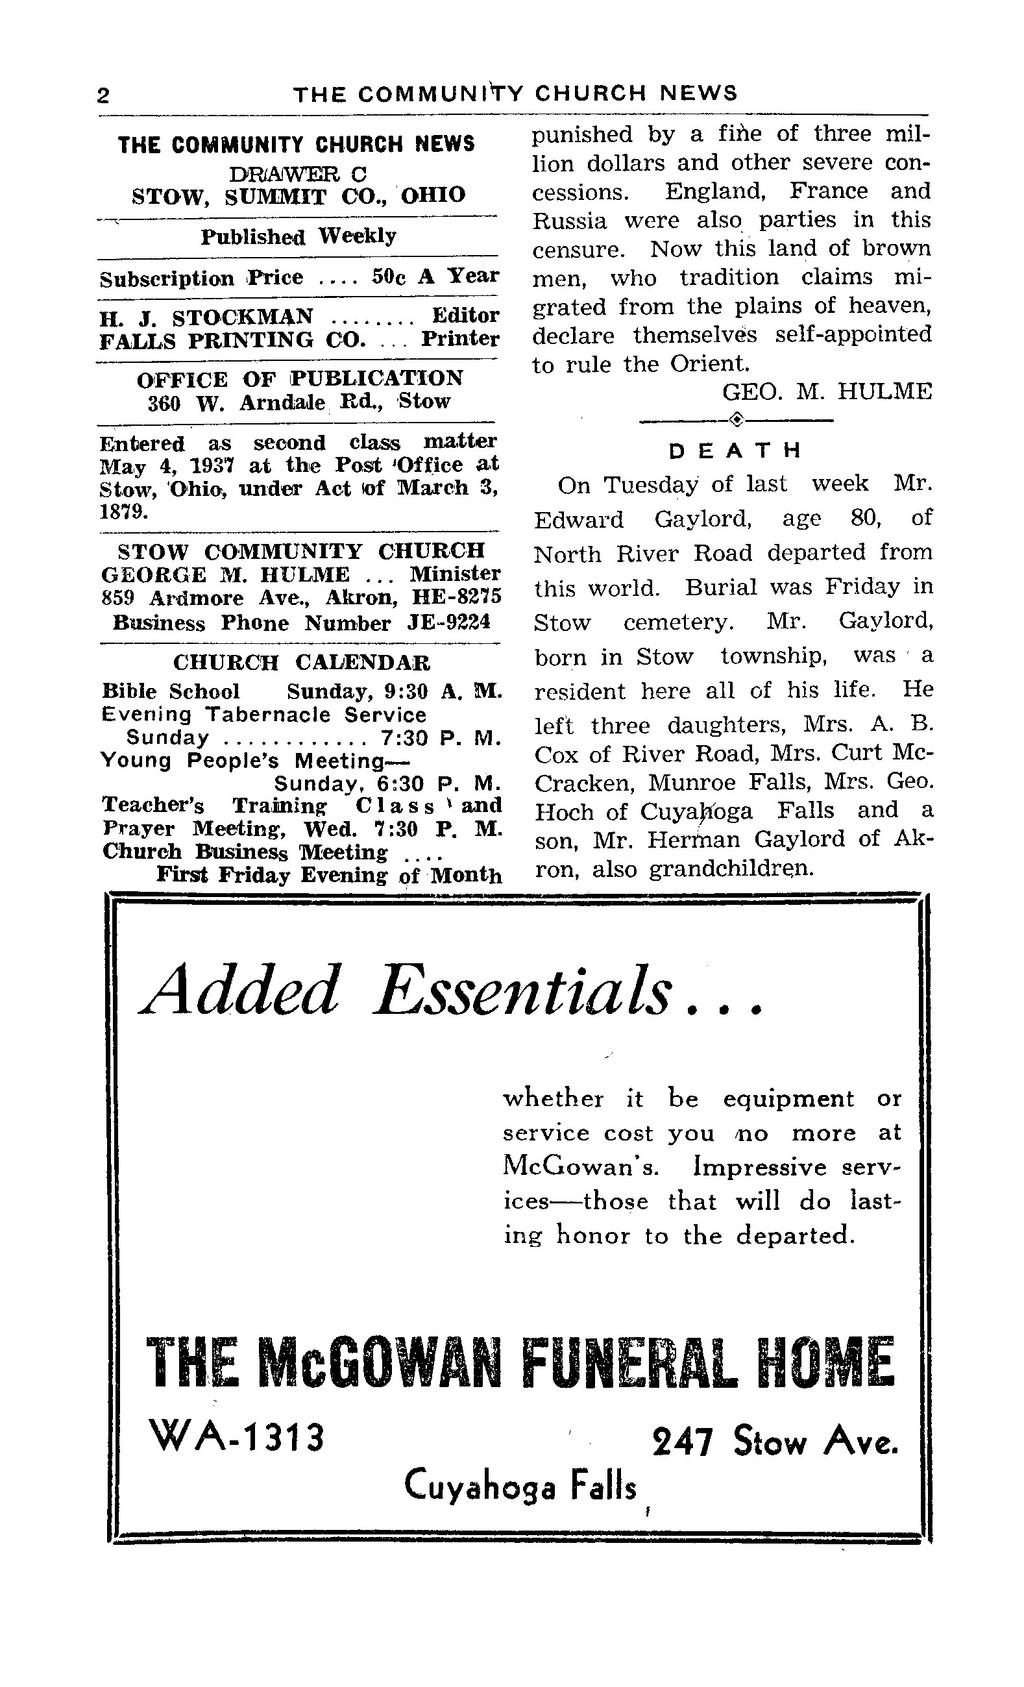 2 THE COMMUNITY CHURCH NEWS THE COMMUNITY CHURCH NEWS DRAWER C STOW, SUMMIT CO., OHIO Published Weekly Subscription Price 50c A Year H. J. STOCKMAN Editor FALLS PRINTING CO.